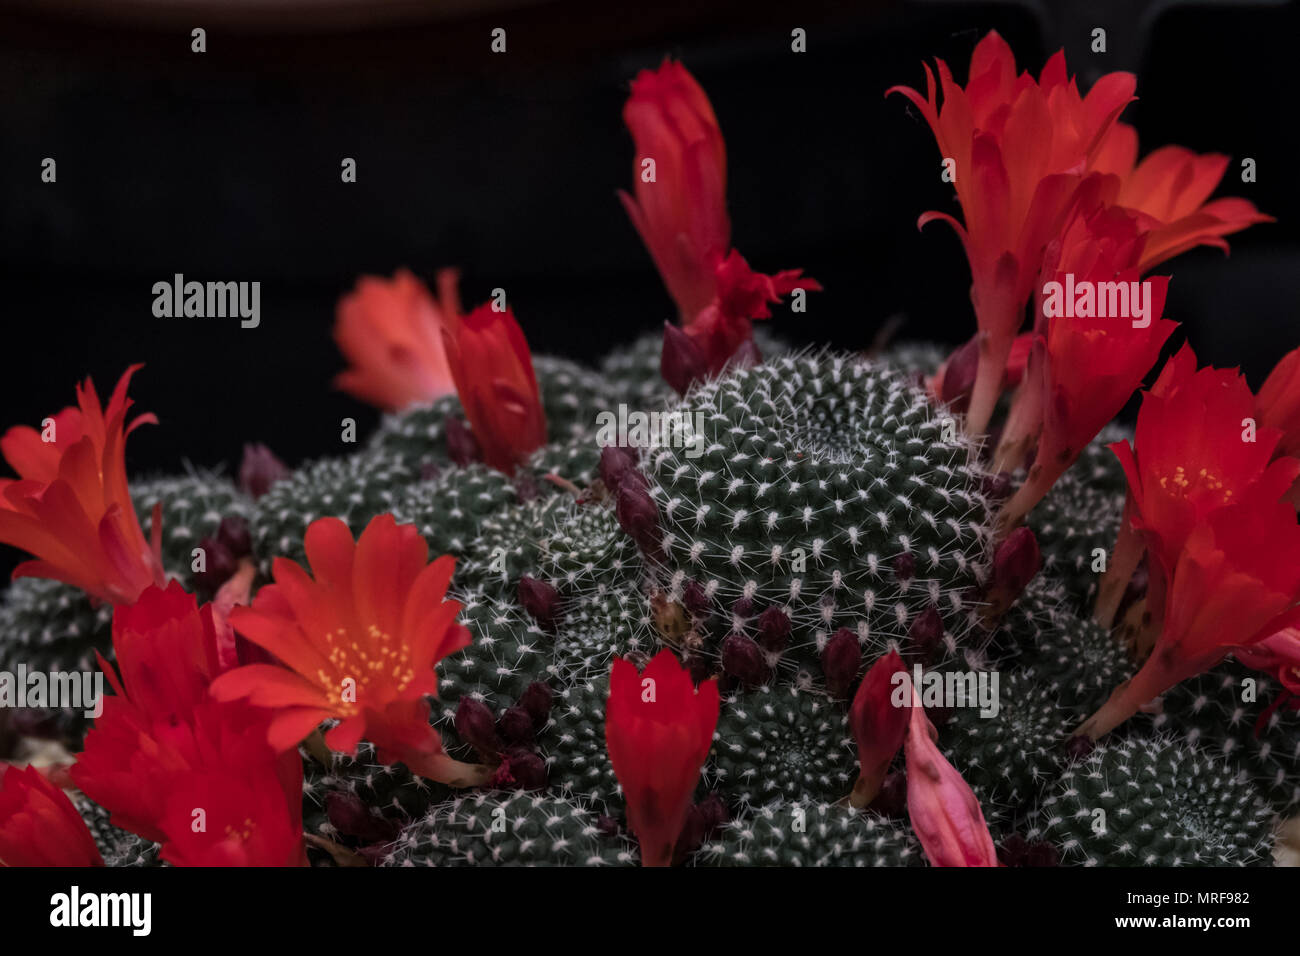 Red flowering cactus plants against a black background, seen at the Royal Horticultural Society Chelsea Flower Show, London UK, 2018. Stock Photo